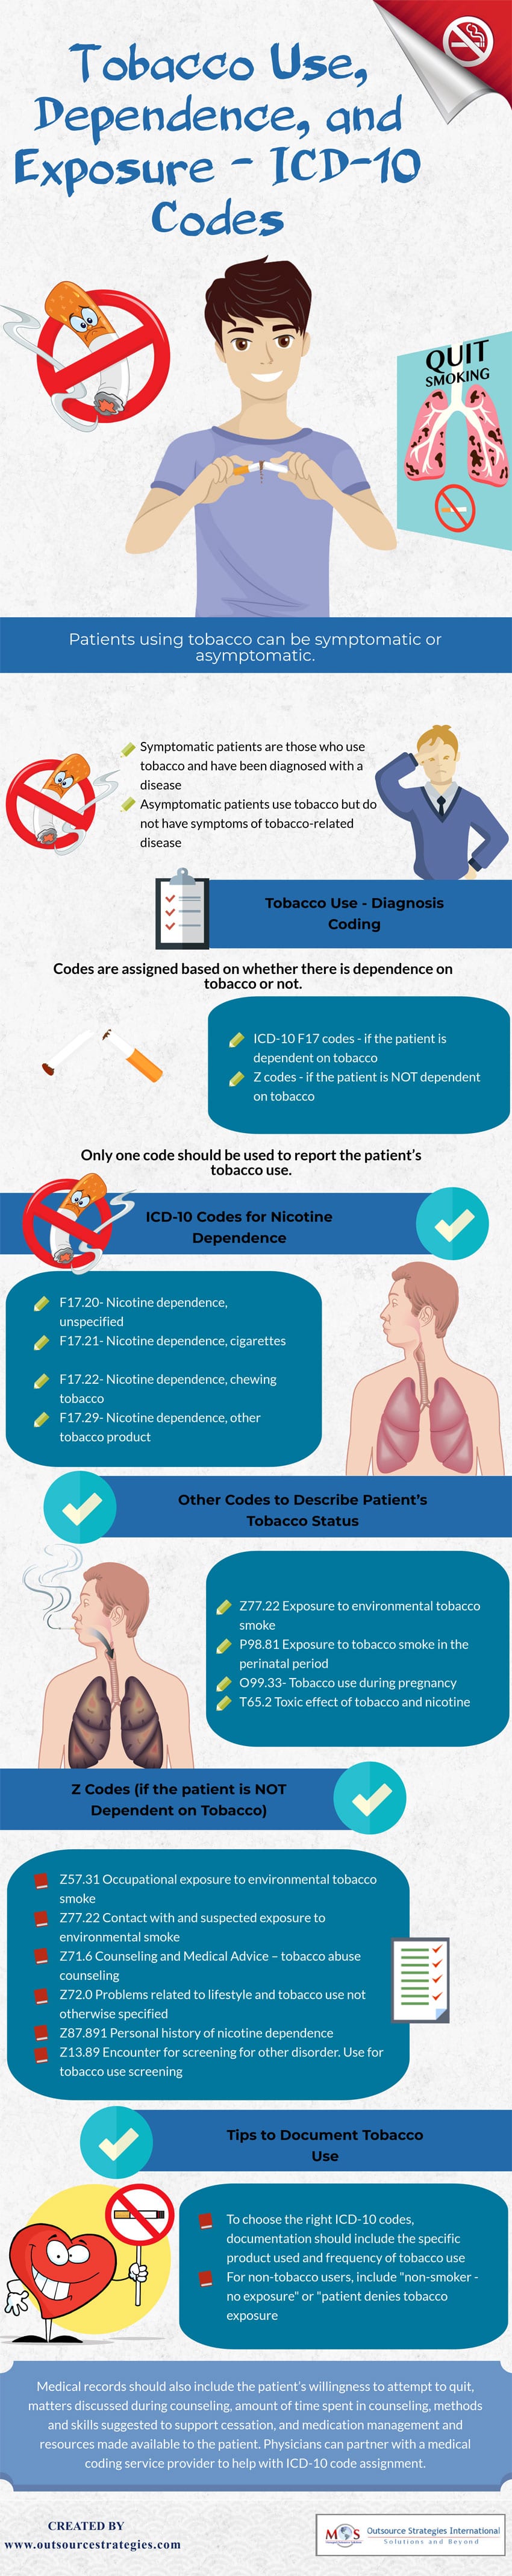 Tobacco Use, Dependence, and Exposure – ICD-10 Codes